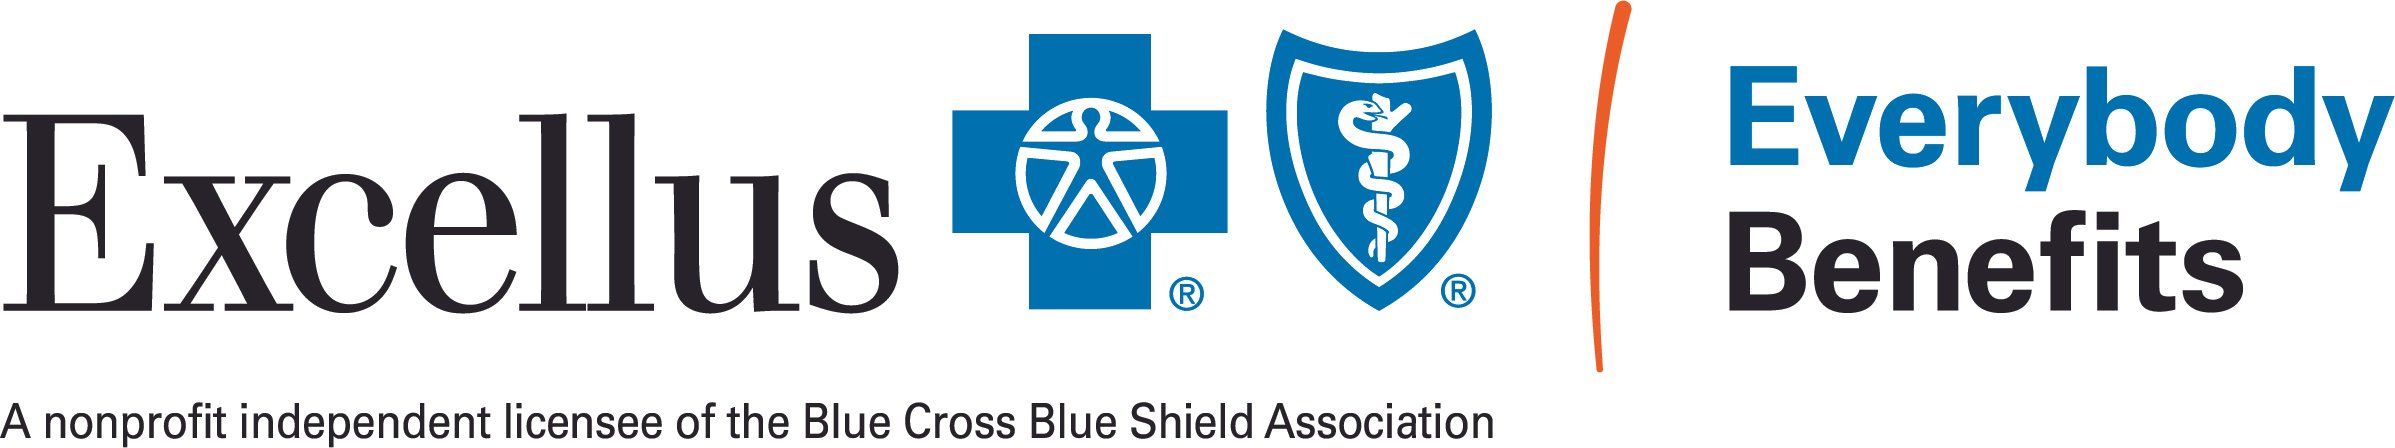 EX_Corporate_Horizontal_Three_Color_with_Tagline_and_Nonprofit Excellus BlueCross BlueShield.jpg